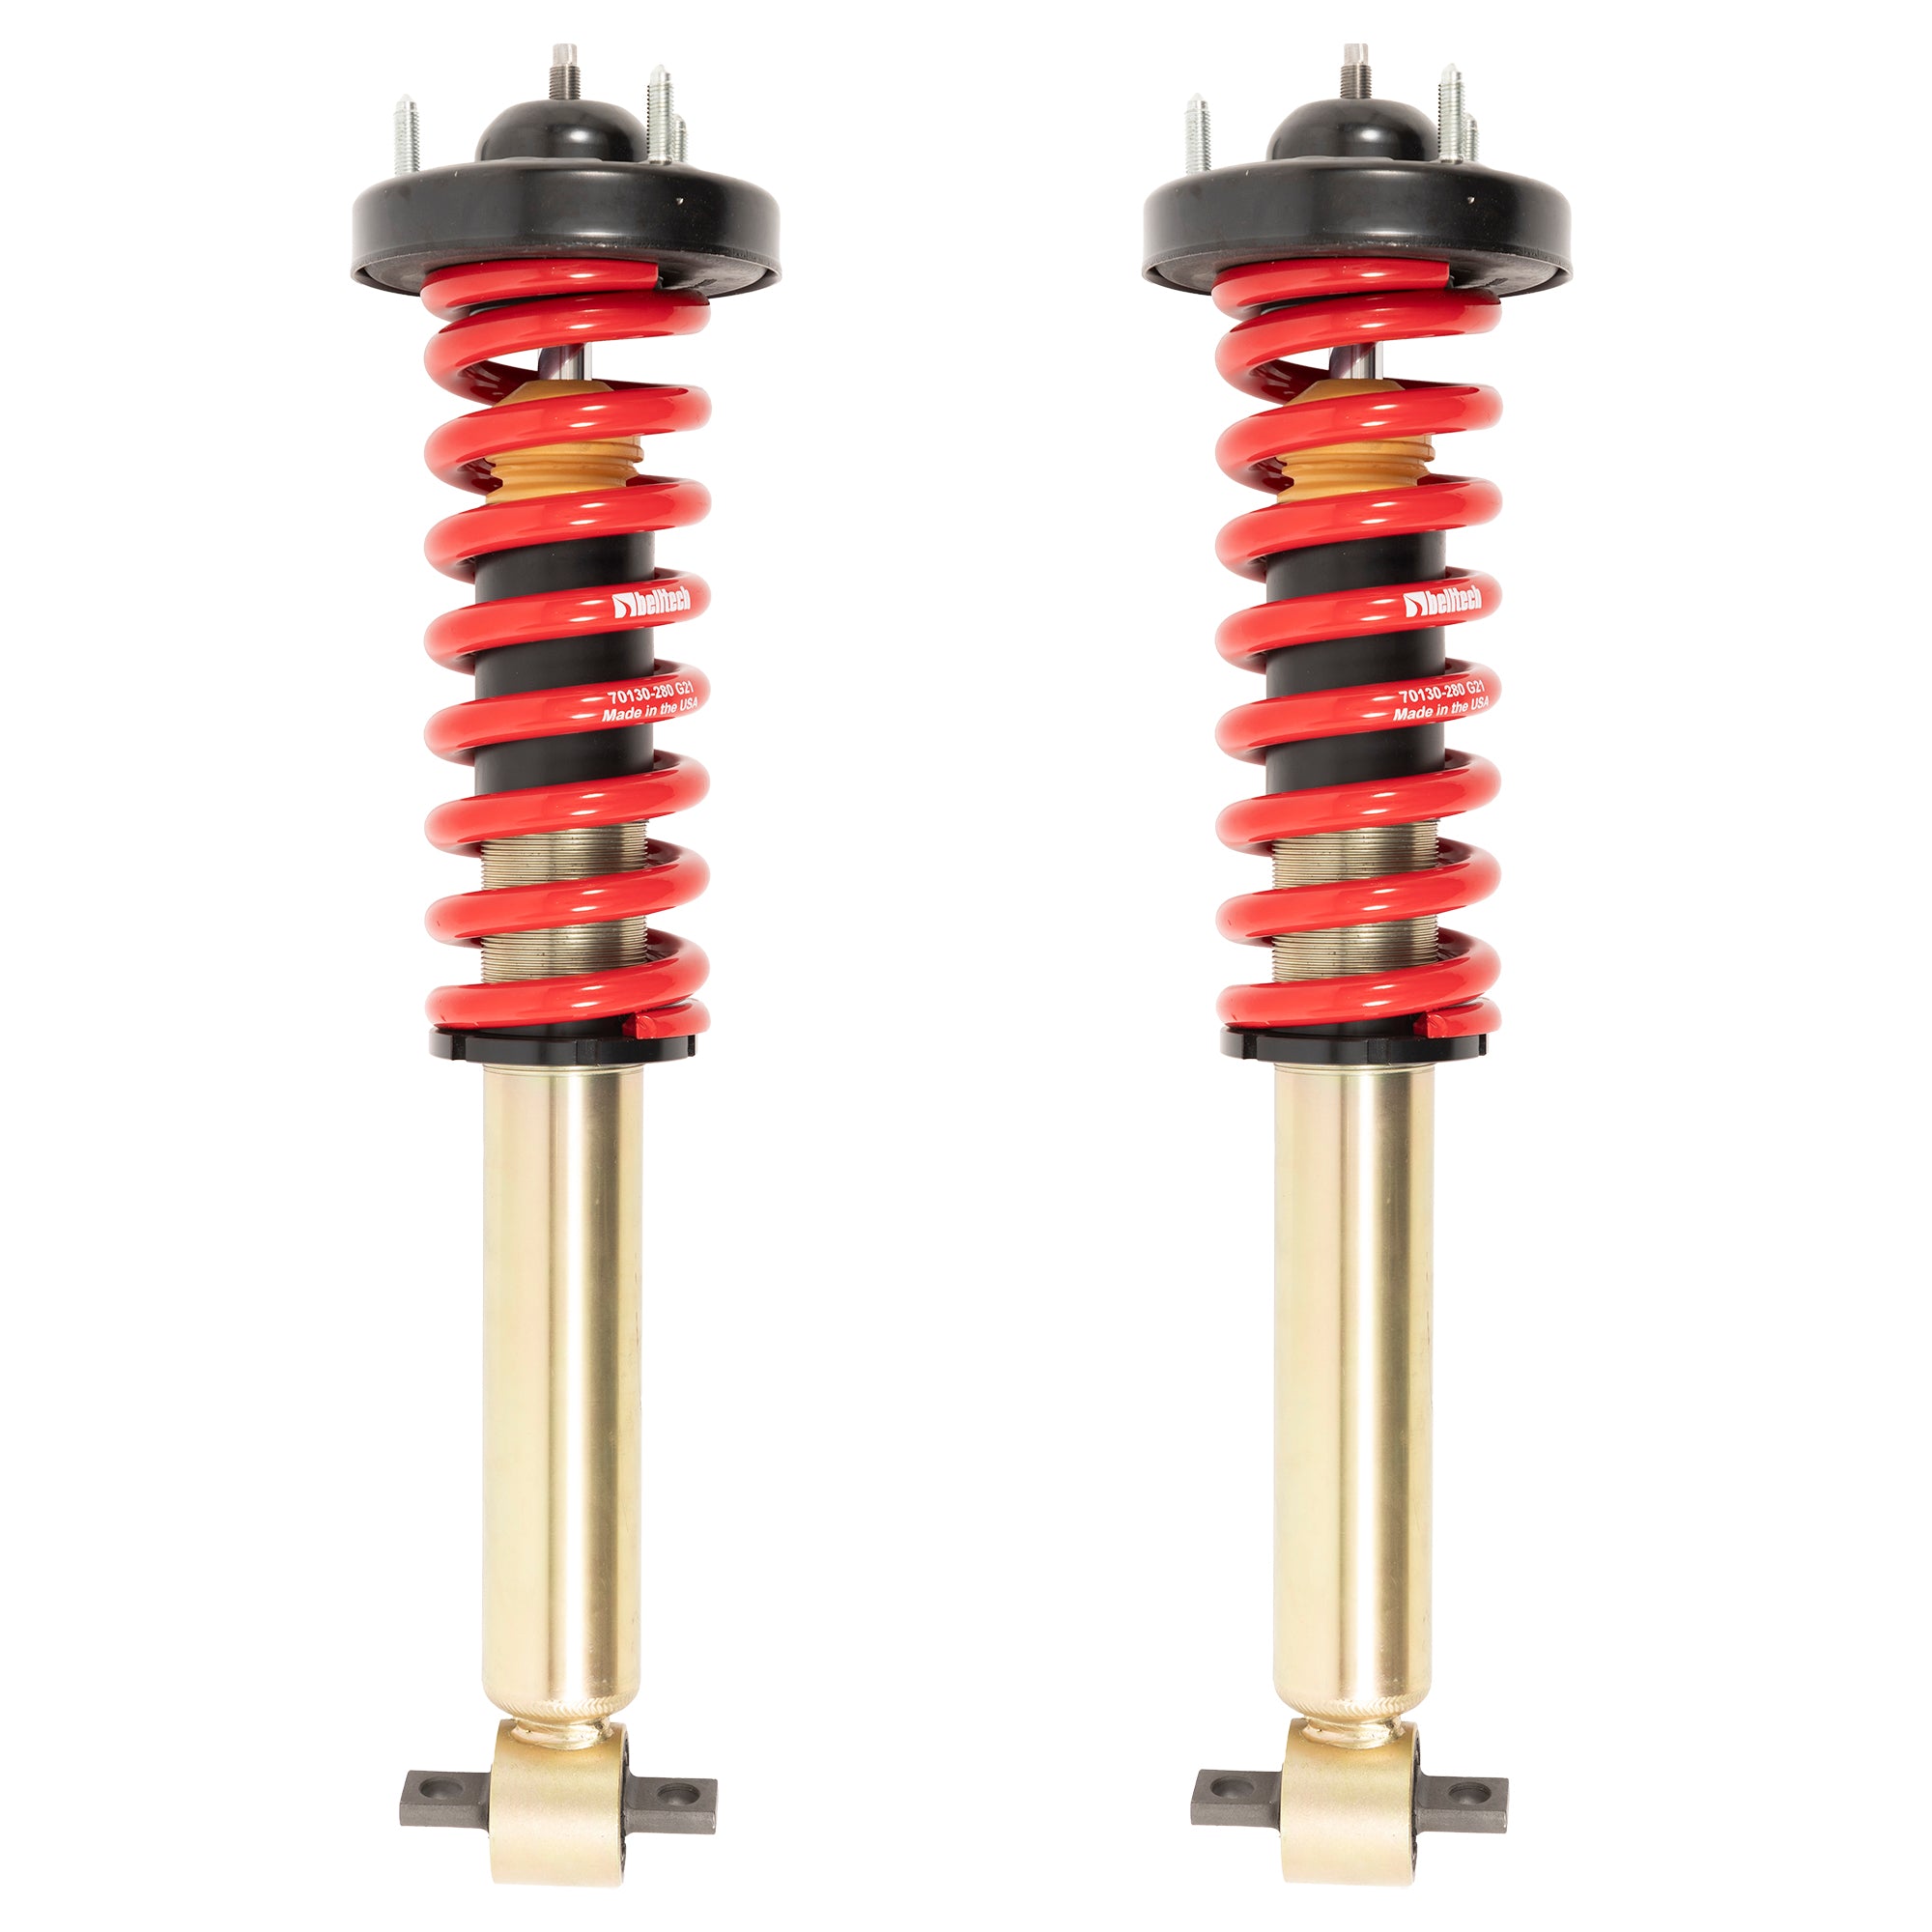 Factory Preset Fixed Damping, 4" Height Adjustable Lift